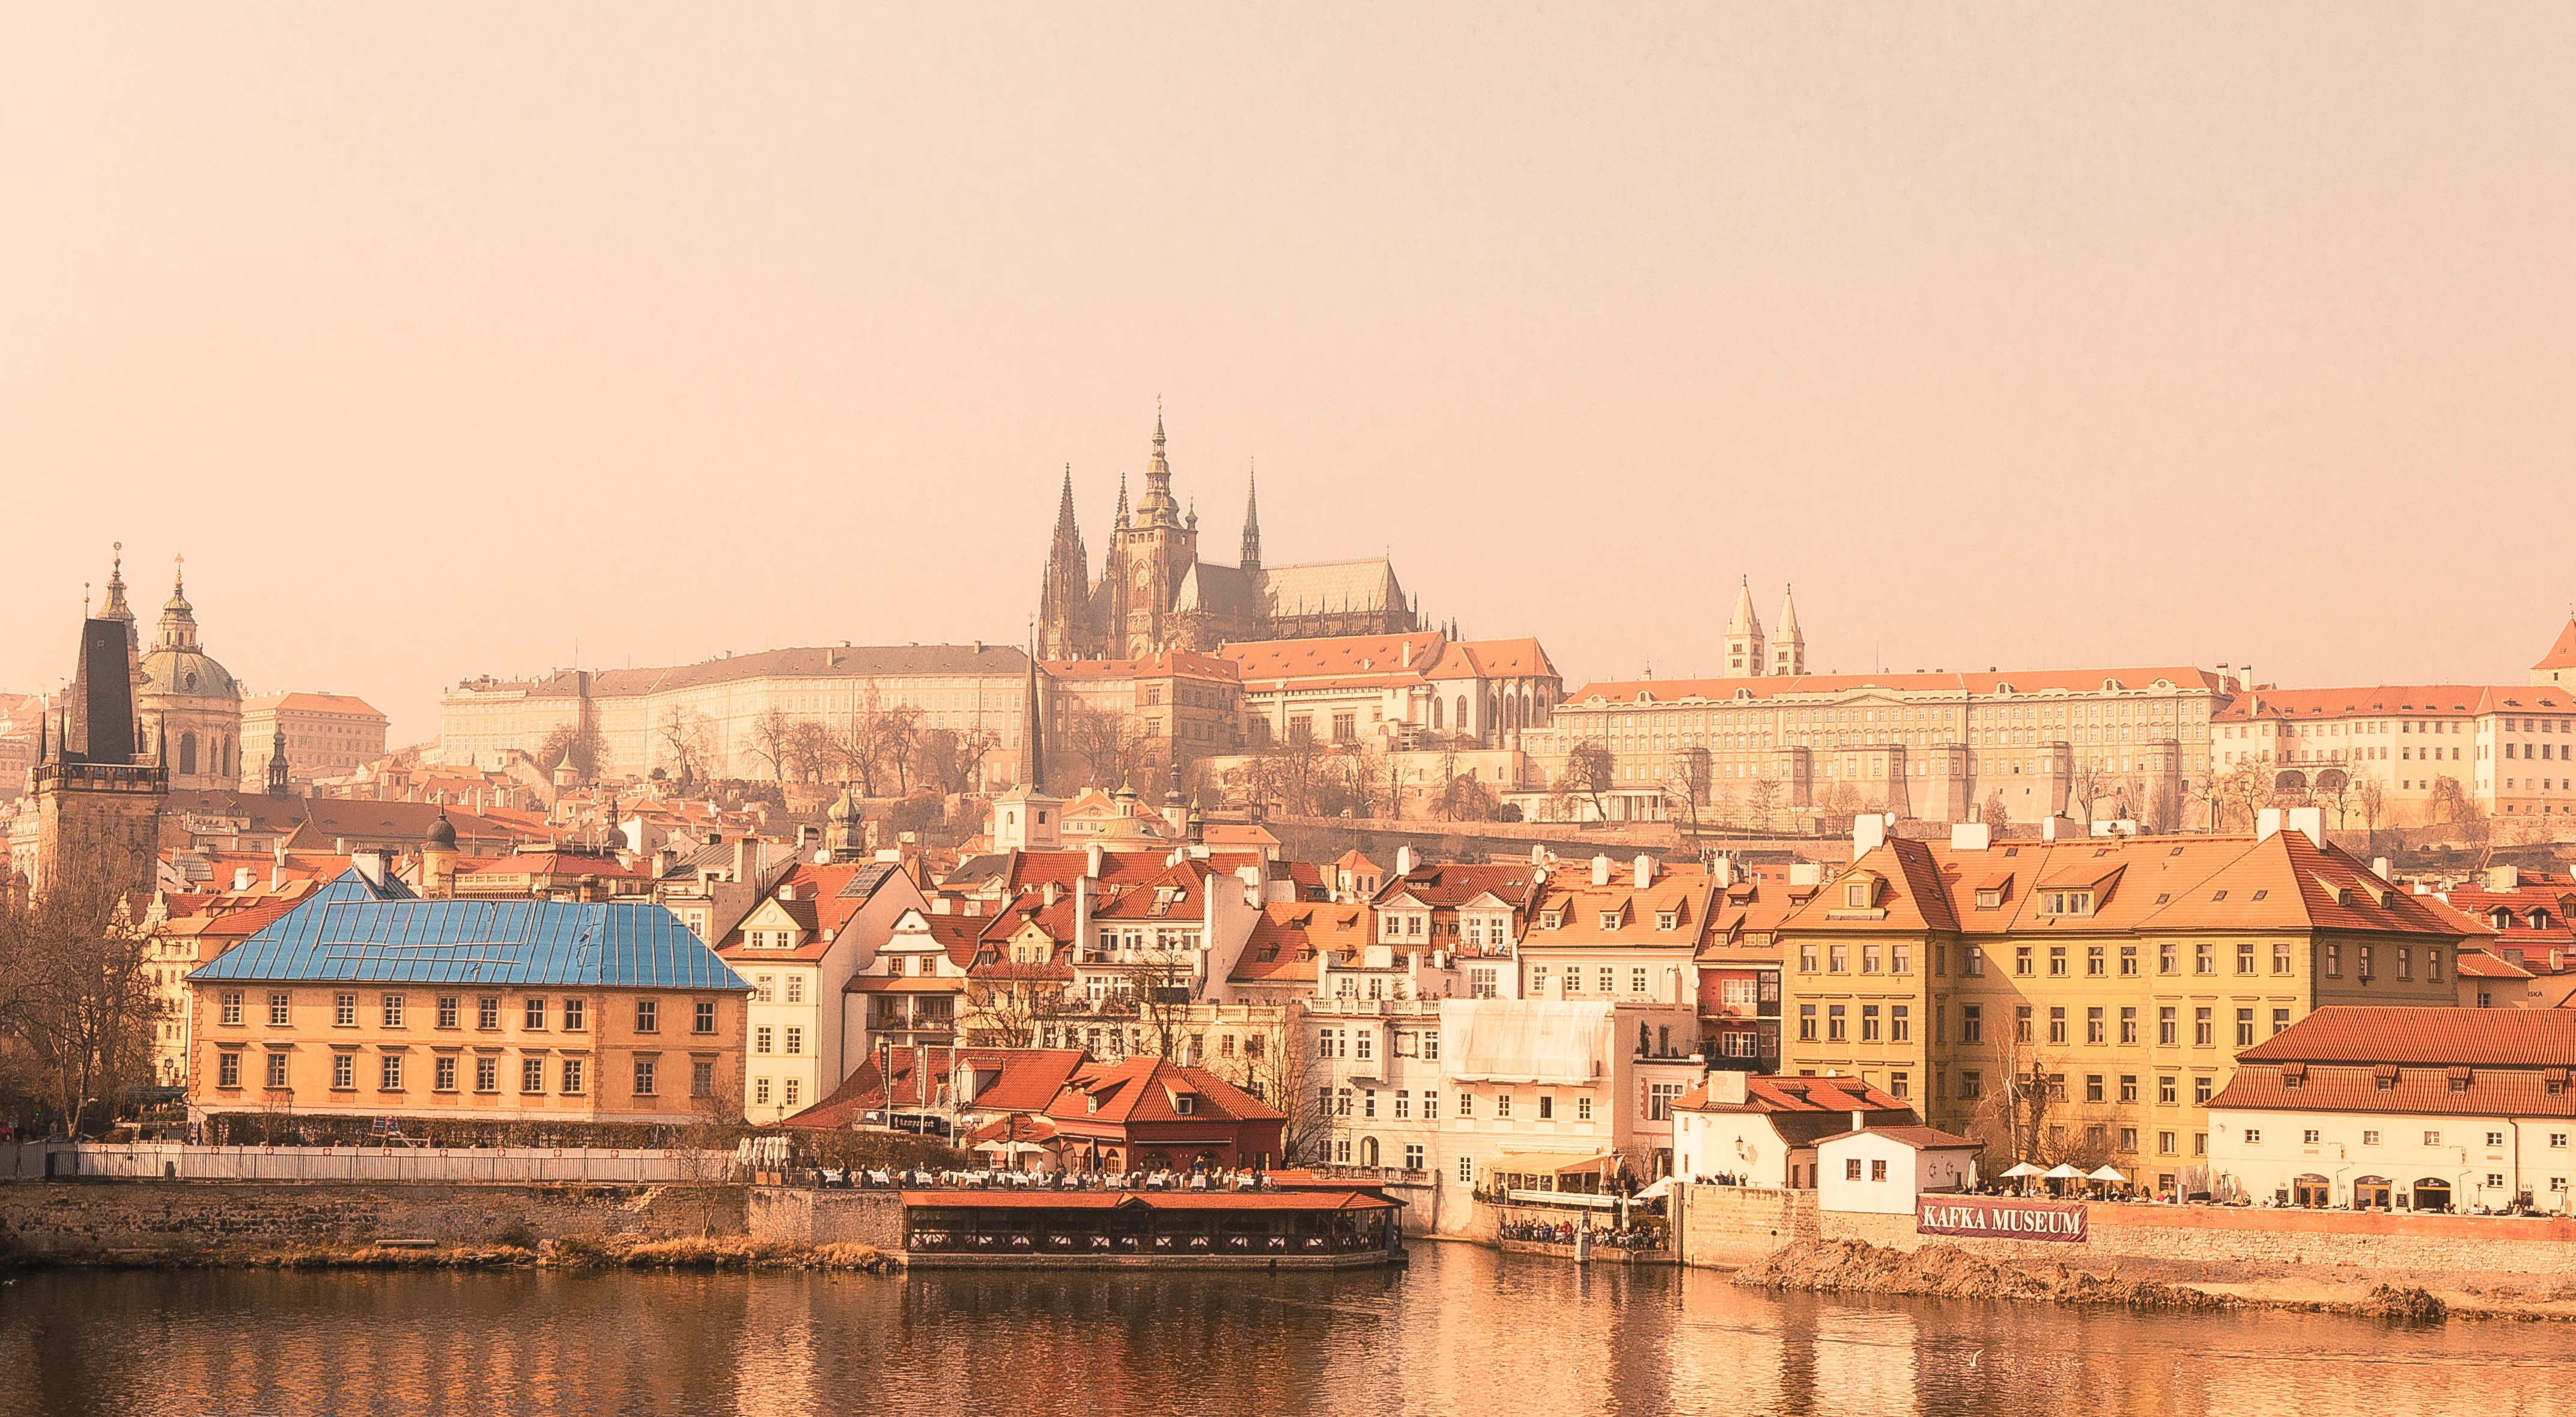 5 Things to Do When Visiting Czech Republic